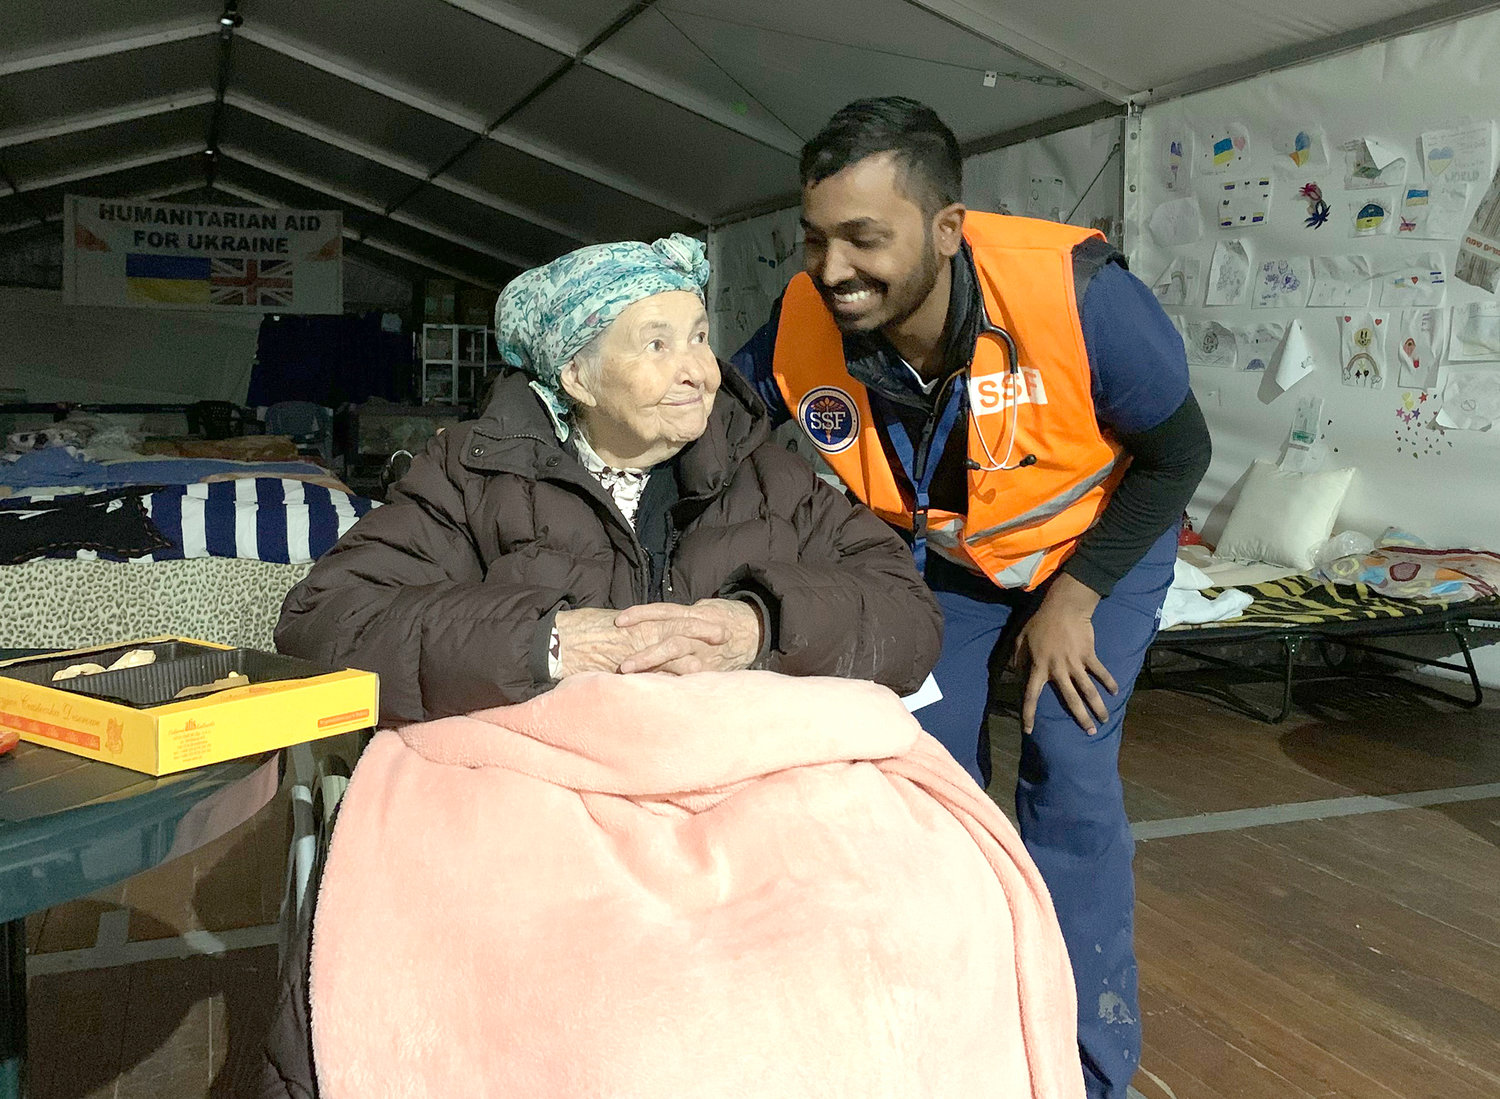 Dr. Chaitanya Rojulpote of Scranton, a second-year internal medicine resident at the Wright Center for Graduate Medical Education, teamed up with the non-governmental medical relief organization Rescuers Without Borders to help people in distress.